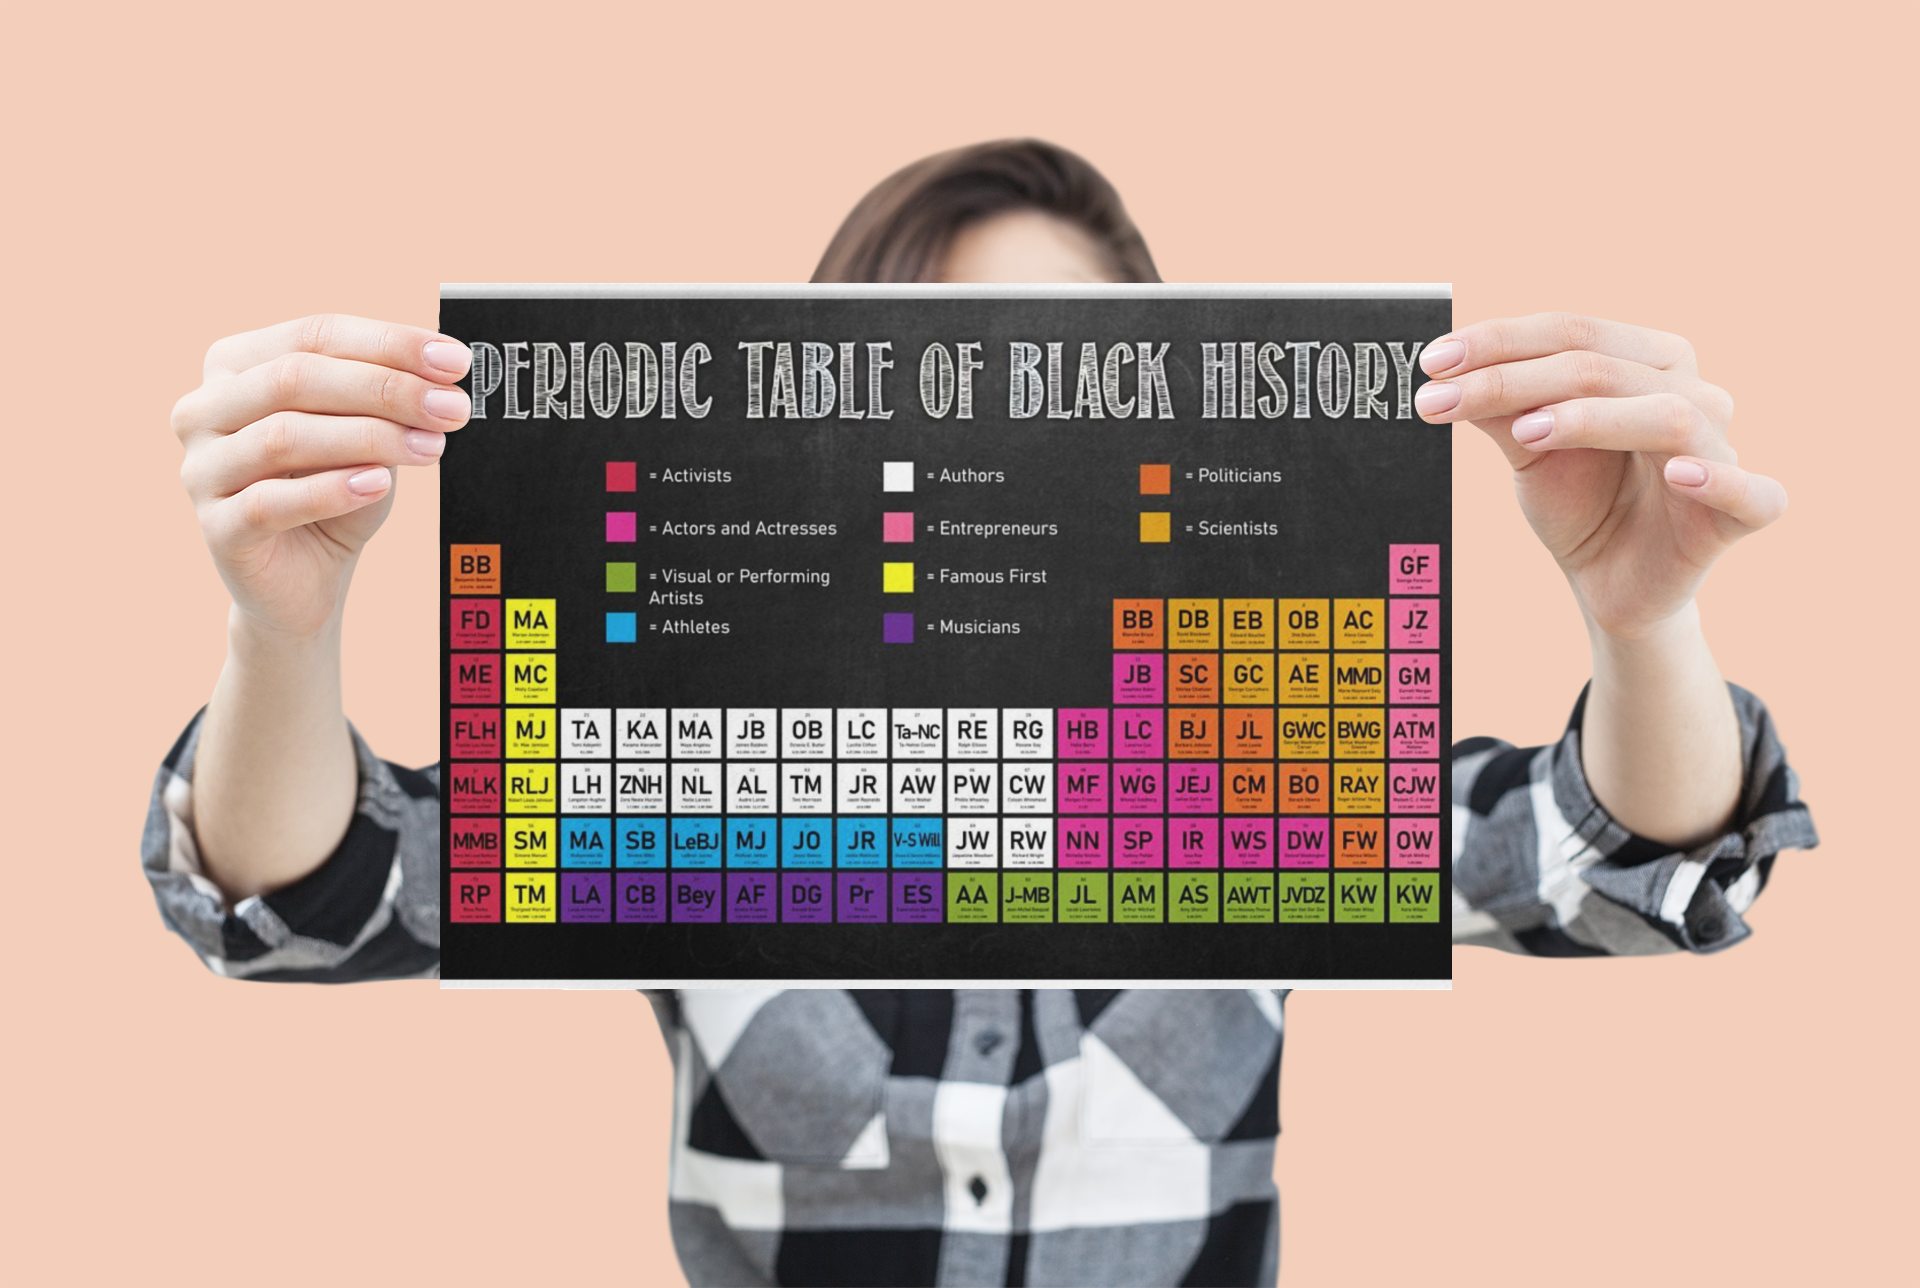 Periodic table of black history poster 2